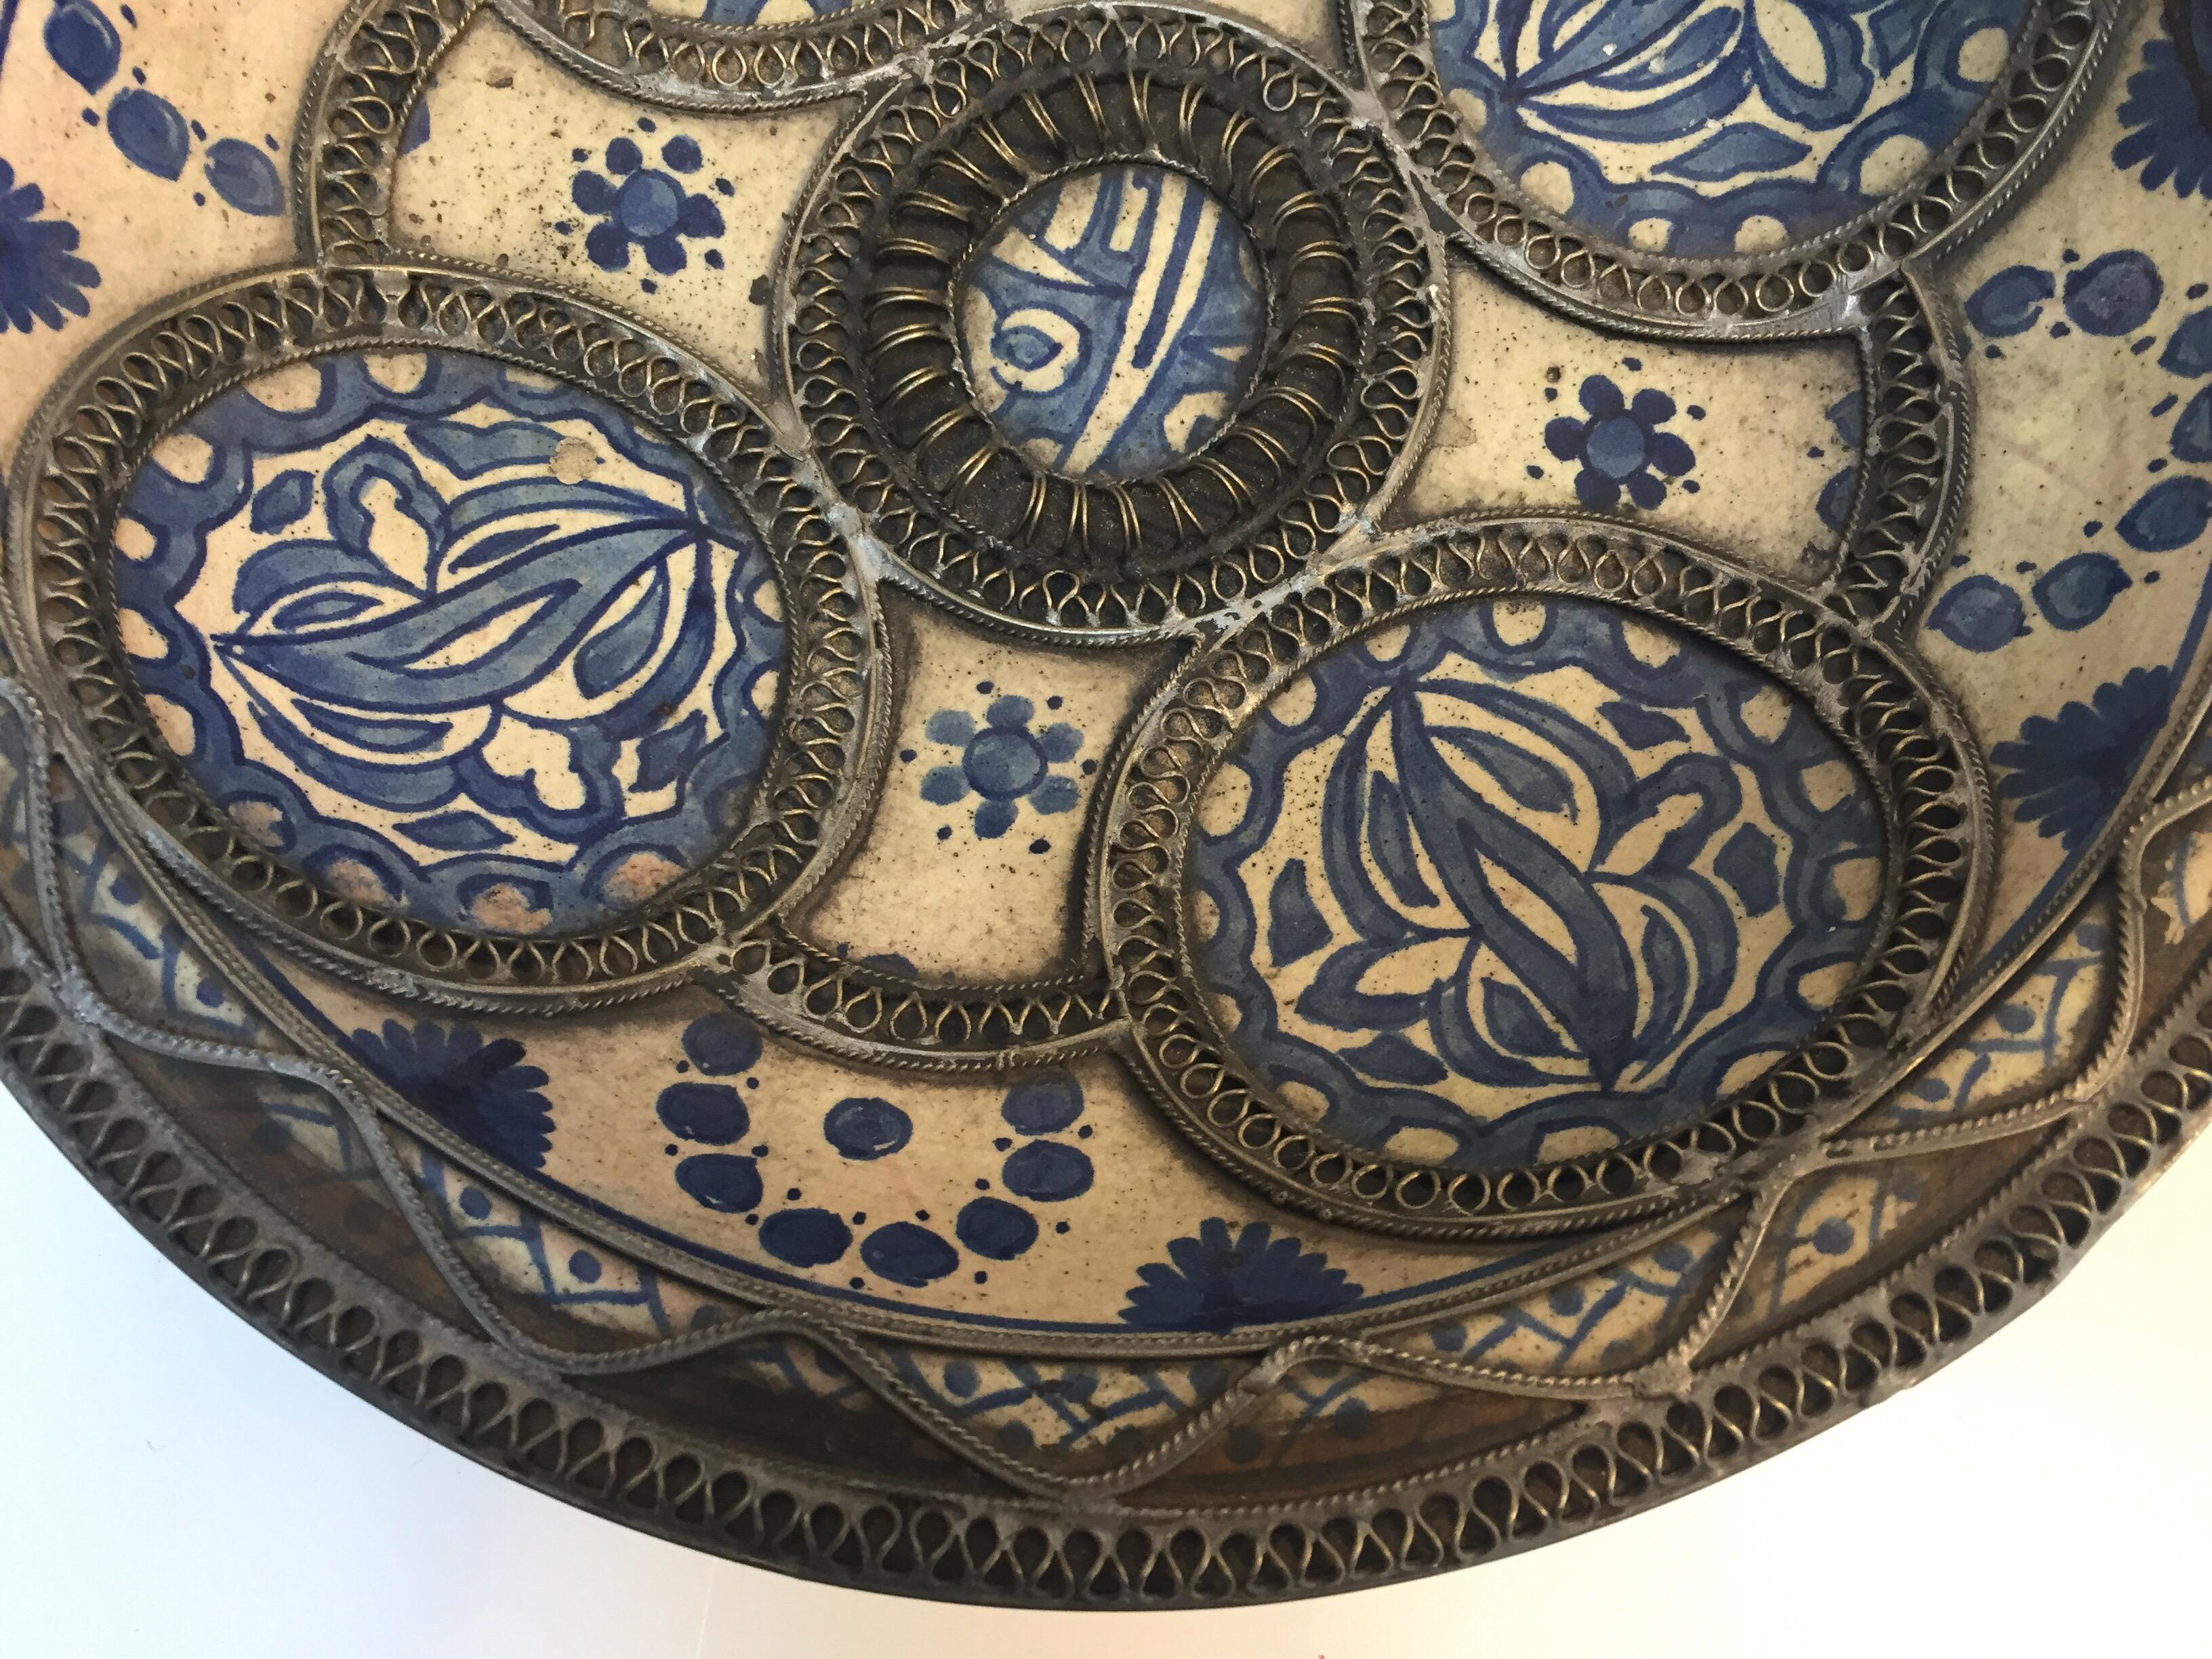 Decorative Moroccan Blue and White Handcrafted Ceramic Bowl from Fez 8